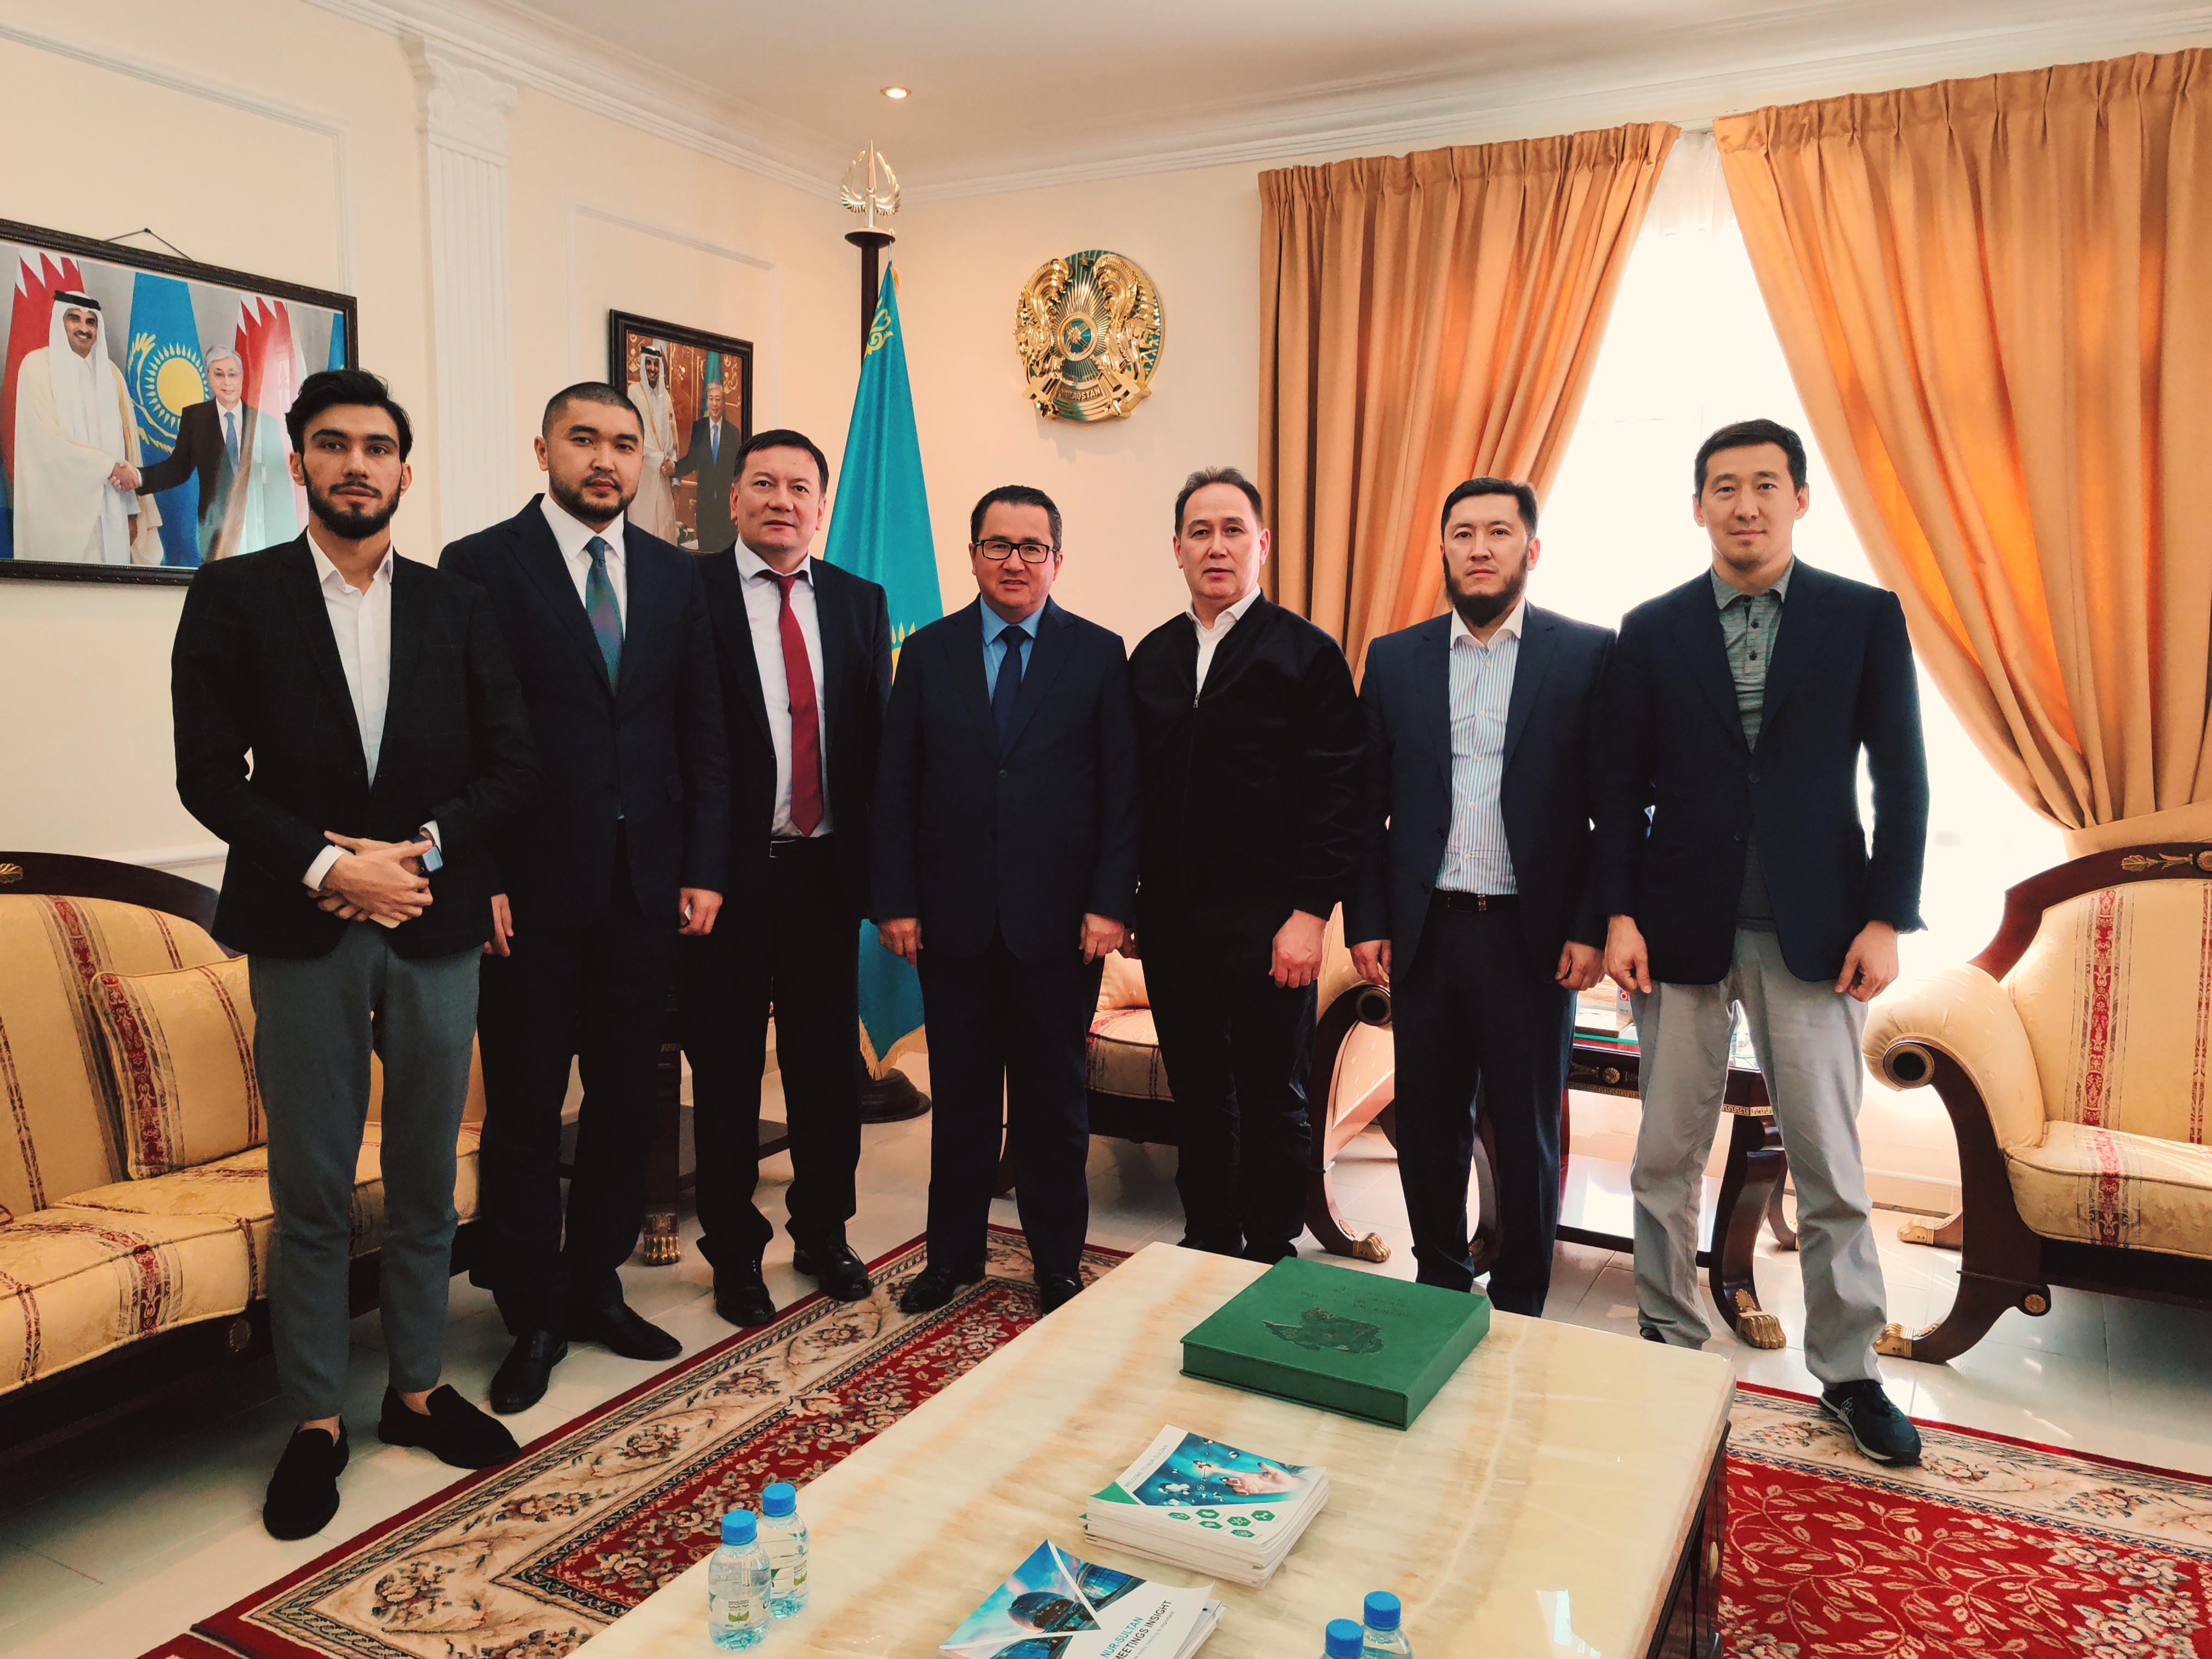 The delegation of the Association of Entrepreneurs of the Assembly of the People of Kazakhstan visited Qatar